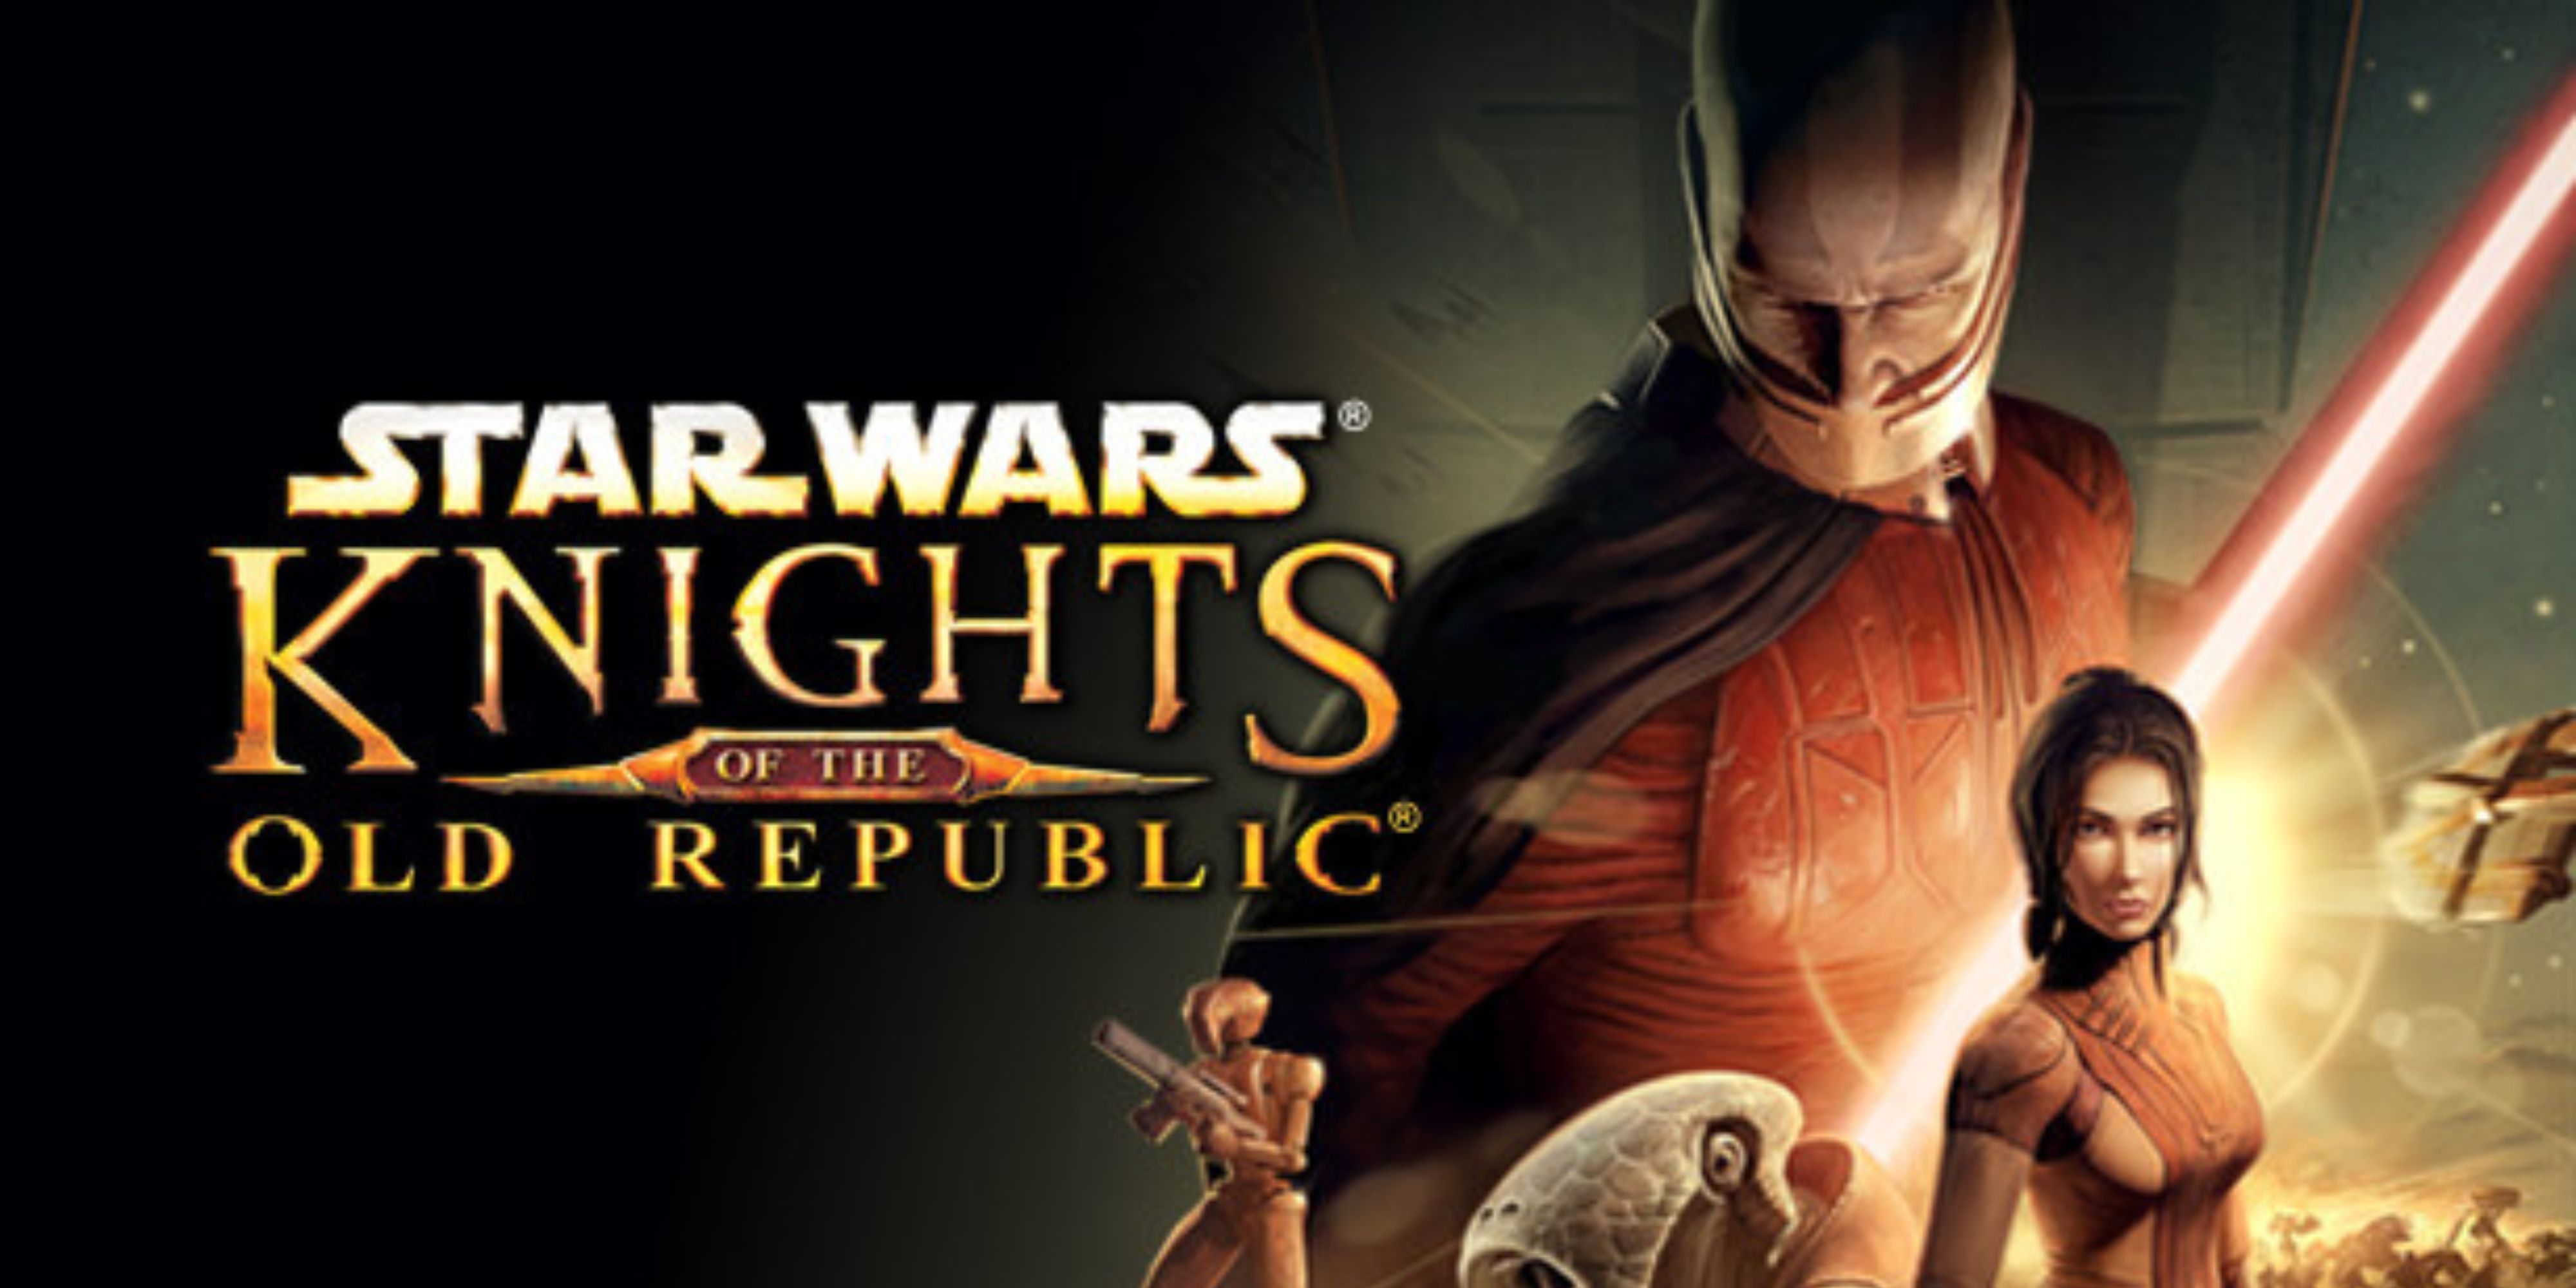 Star Wars Knights of the old republic with game title